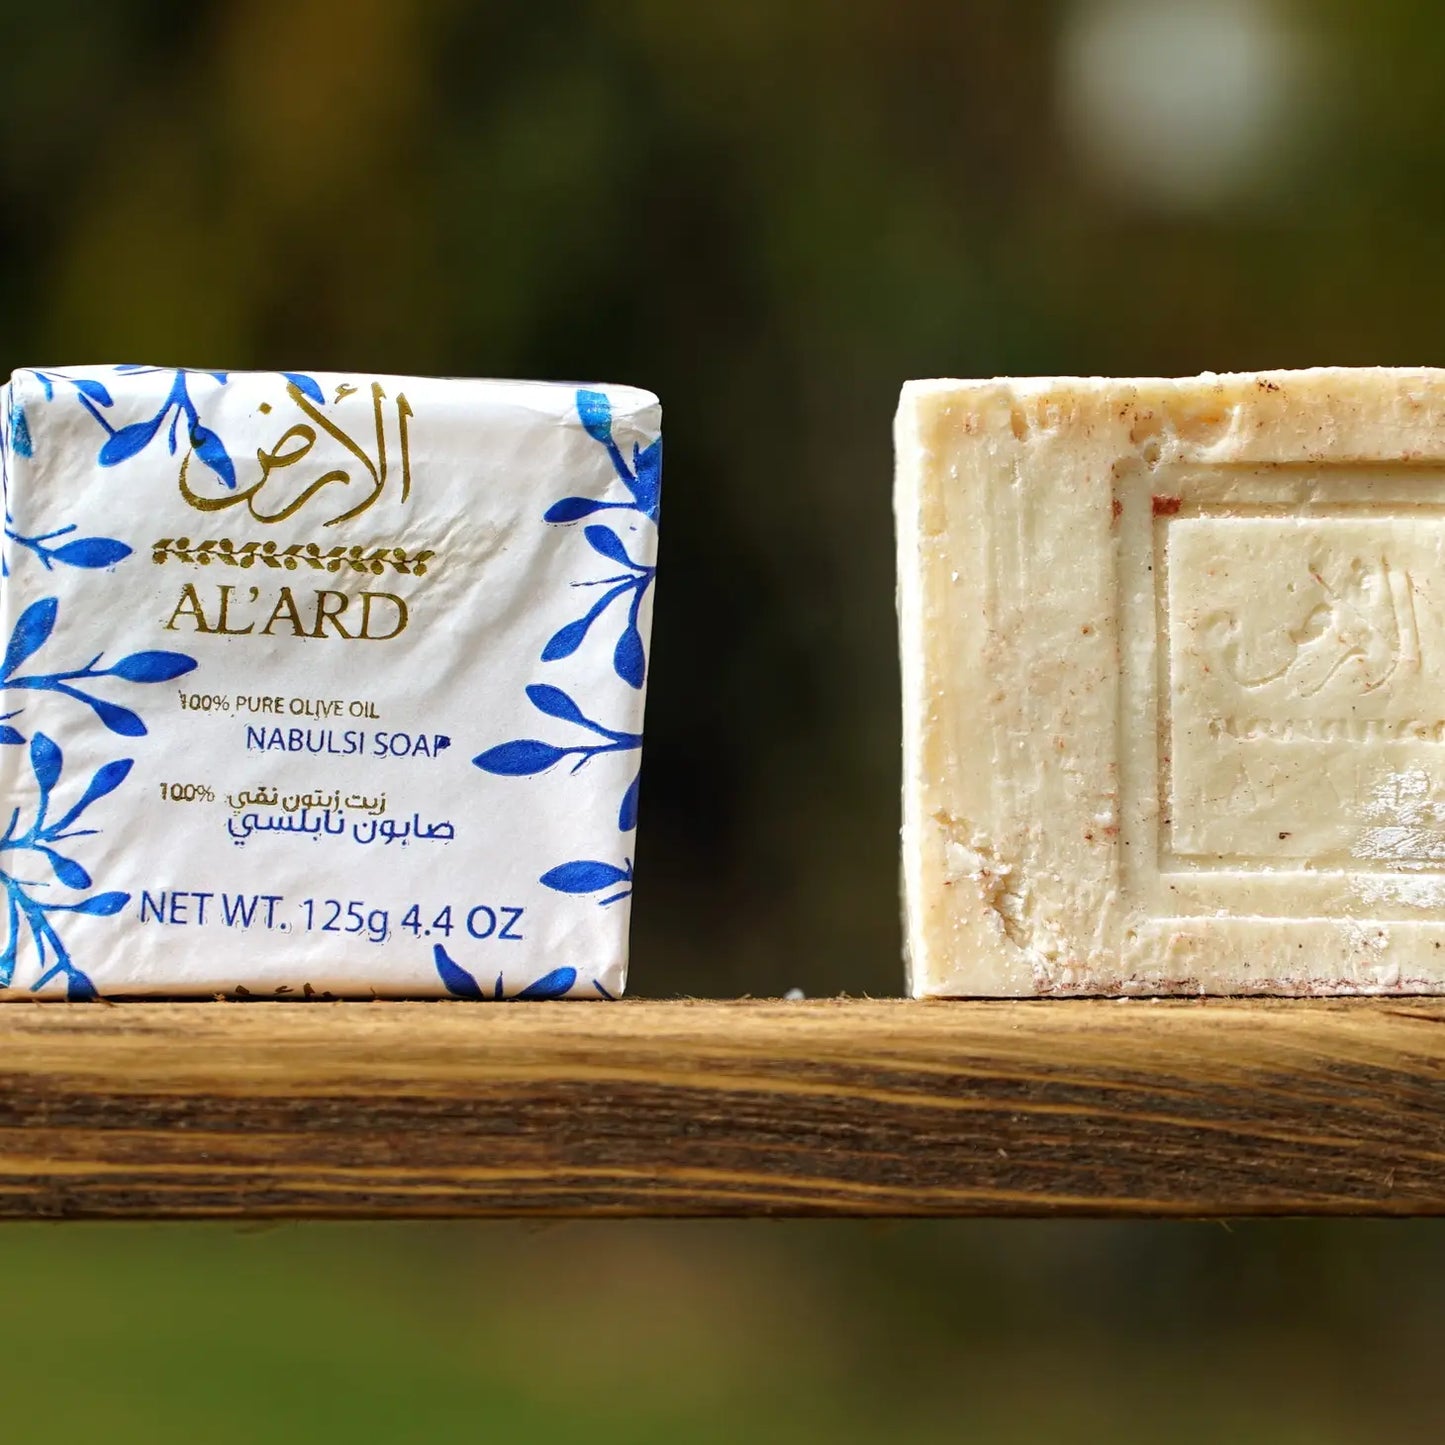 Palestinian Soap Cooperative: Nablus Olive Oil Soap